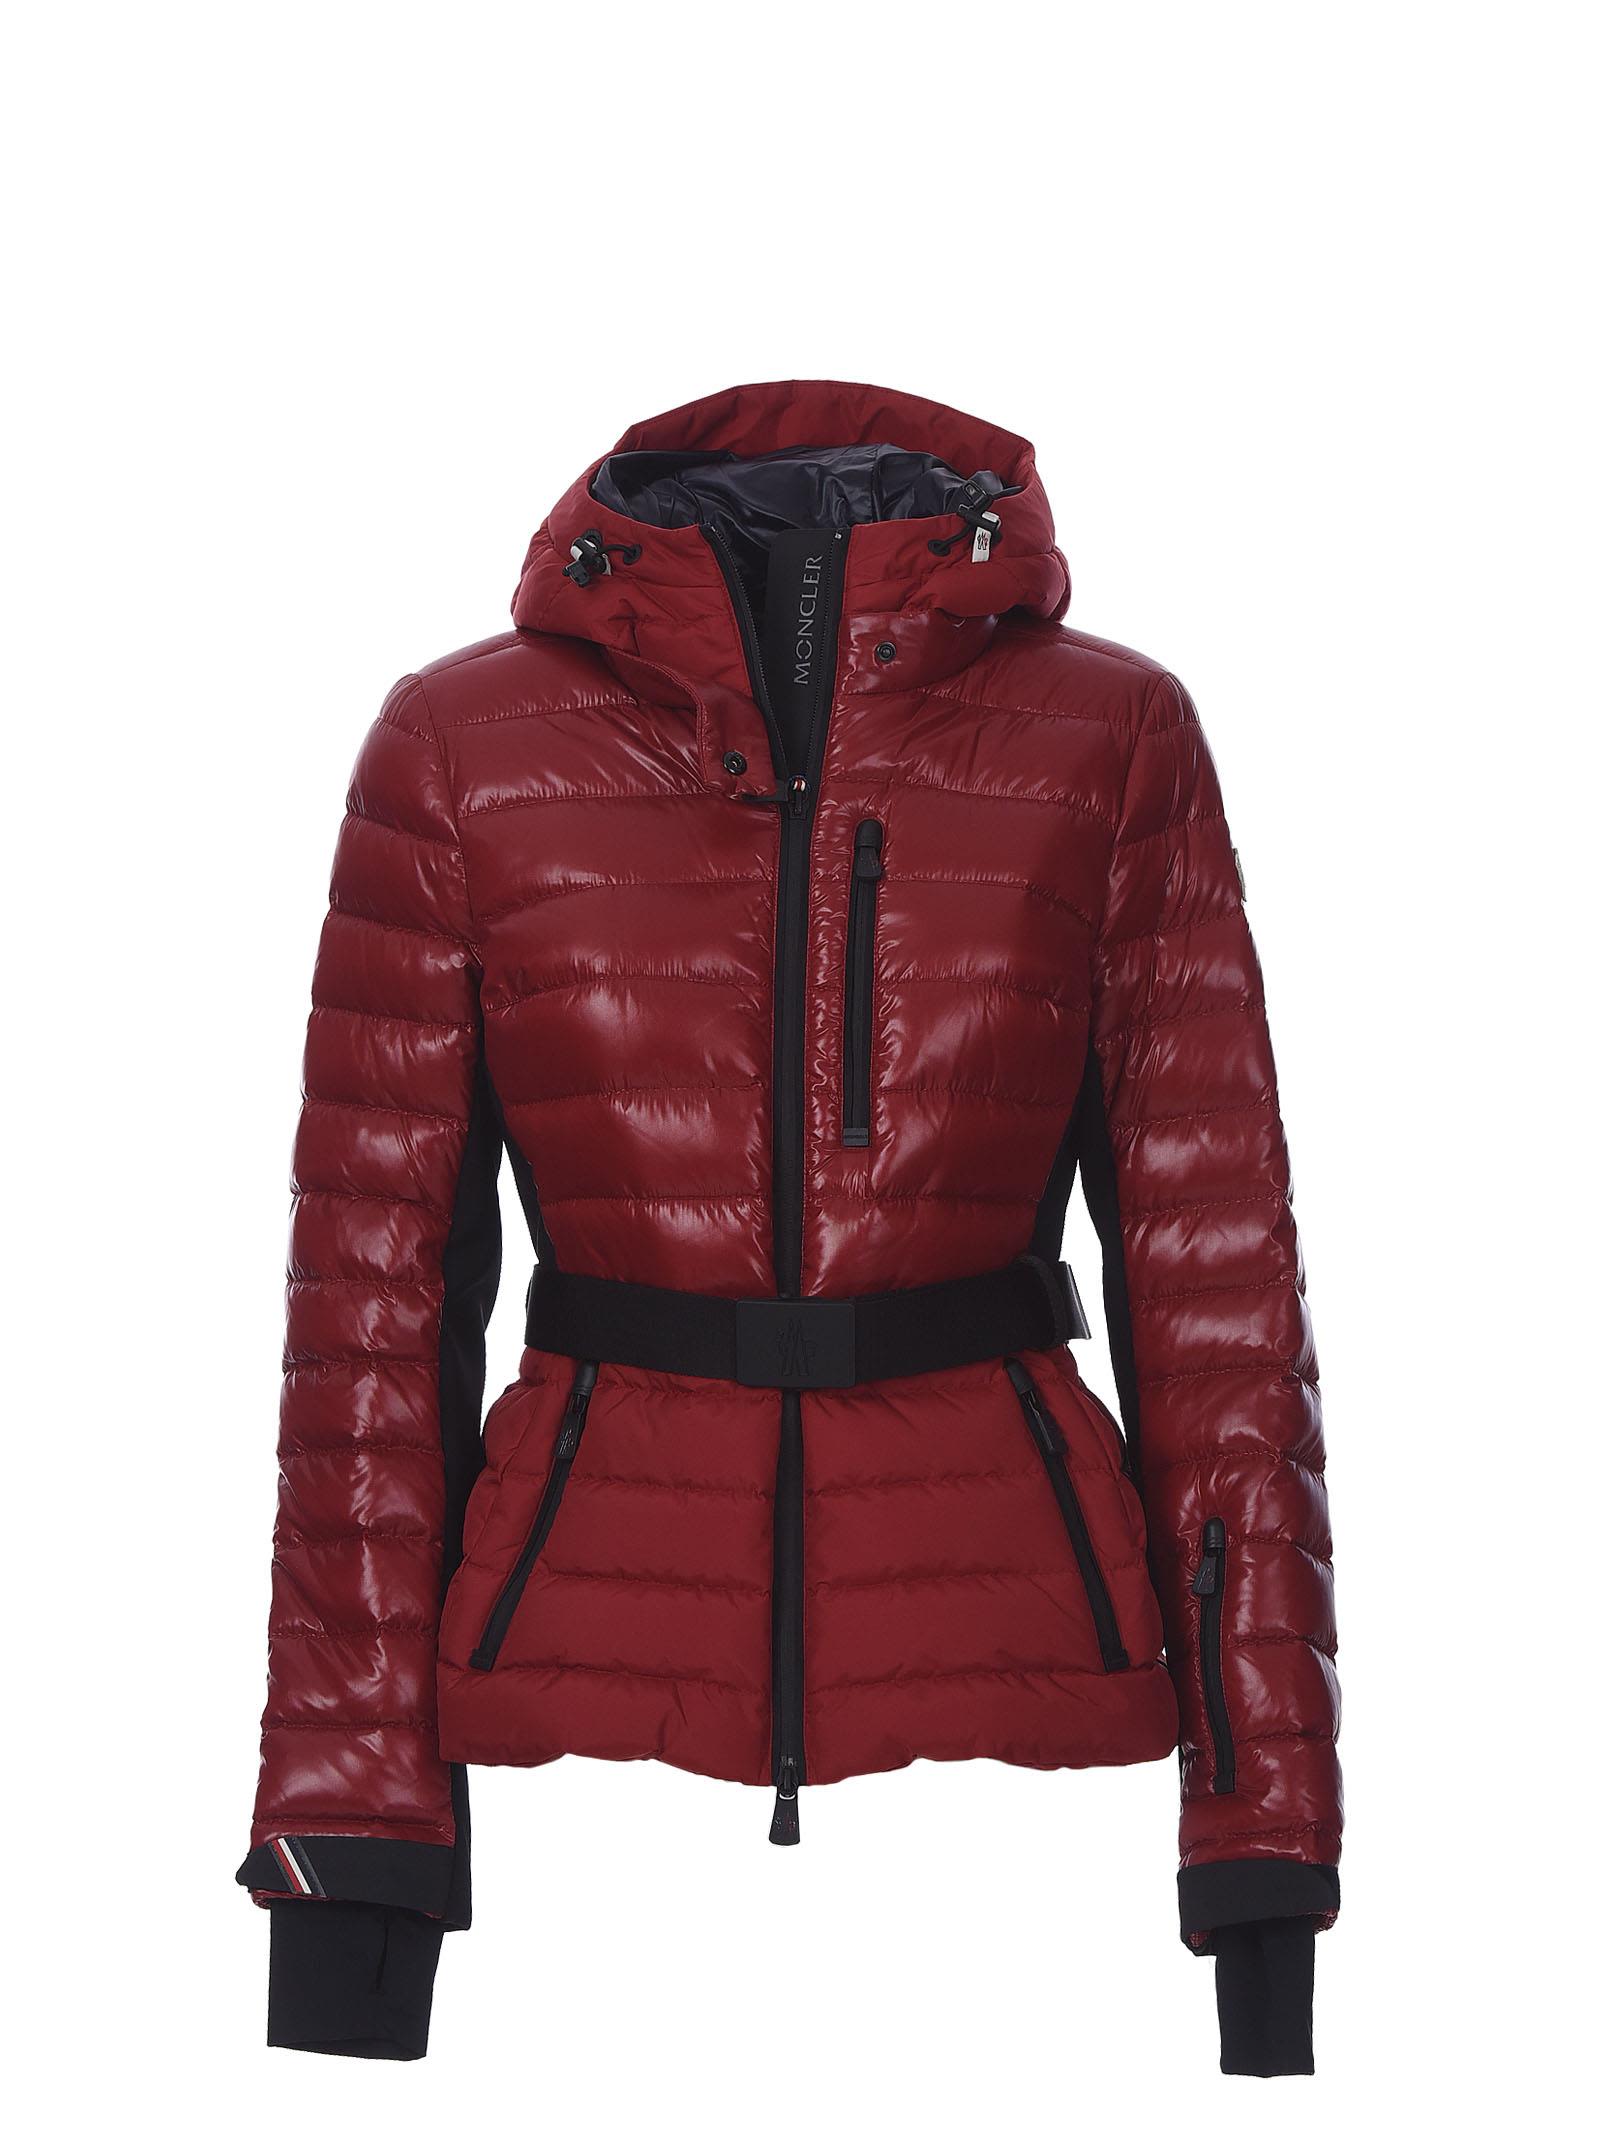 Moncler Grenoble Bruche Down Jacket Red In Rosso | ModeSens